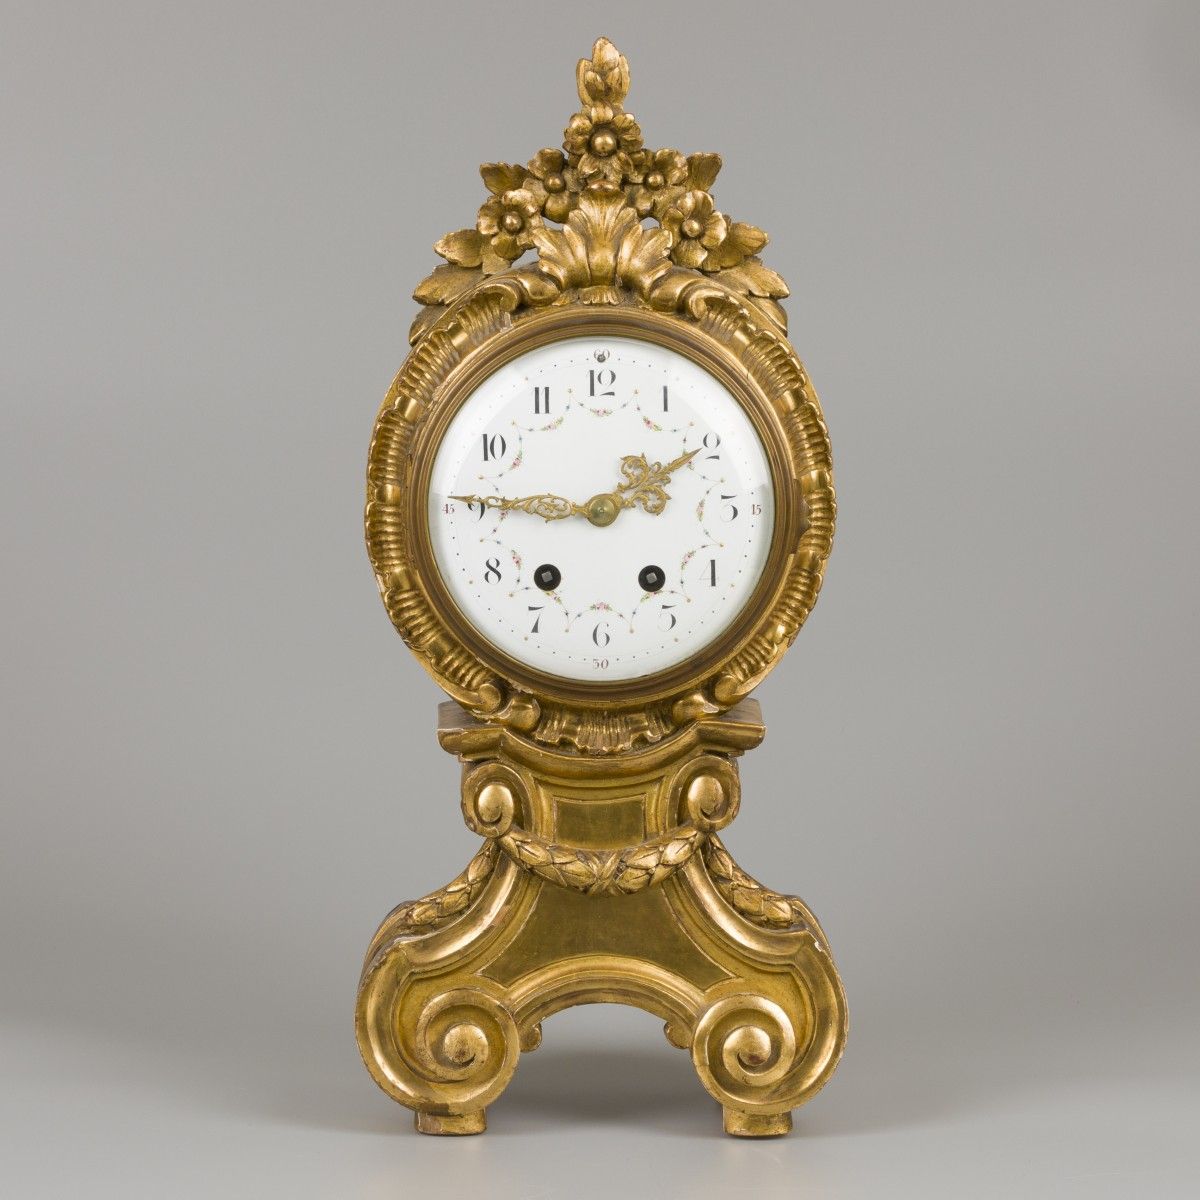 A Louis XV-style mantle clock in guiltwood and gesso case, 19th century. 珐琅表盘上的阿&hellip;